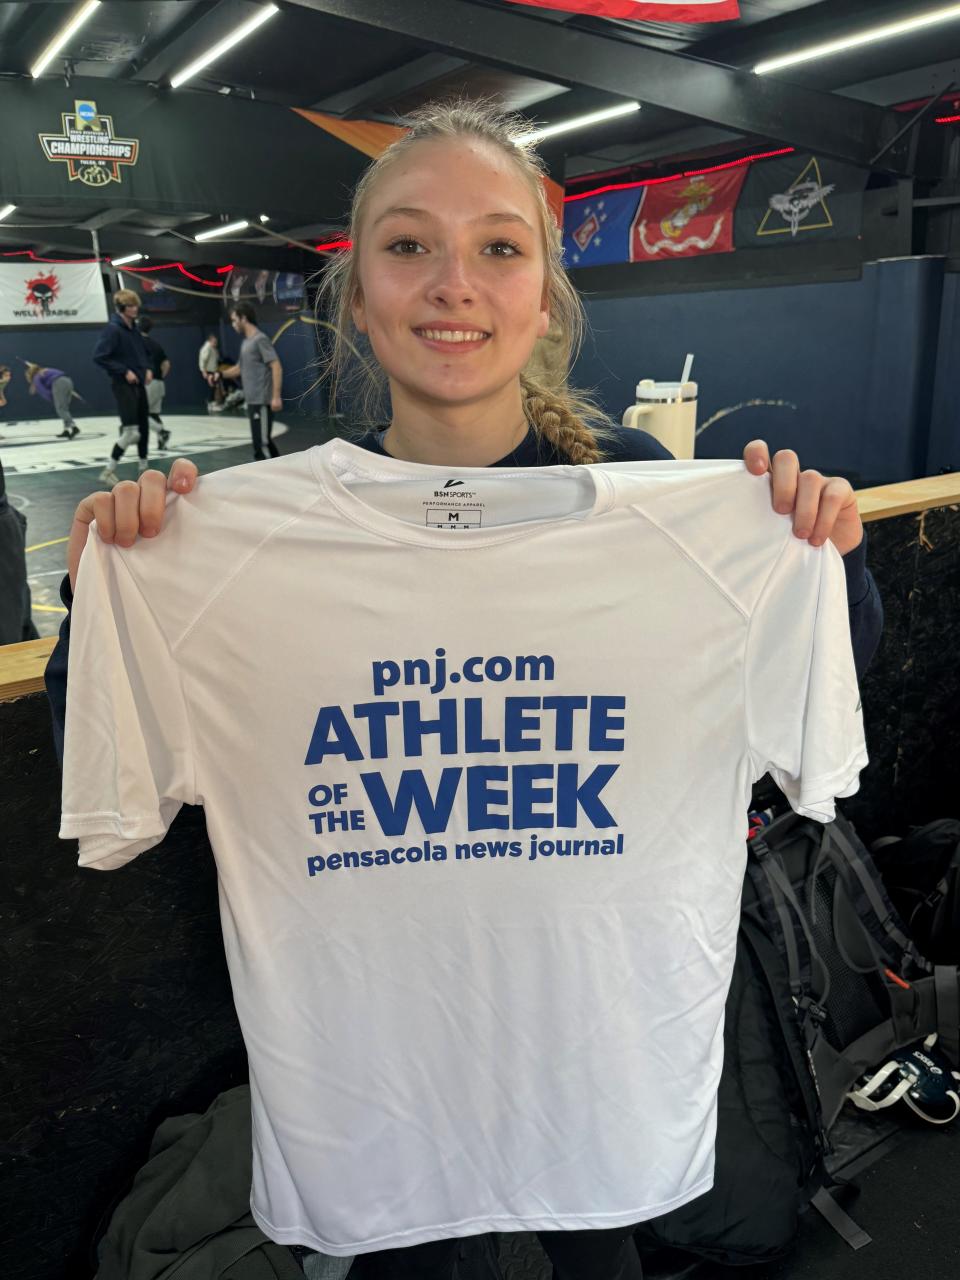 Gulf Breeze's Lily Powell won the PNJ Athlete of the Week award for the week of Feb. 5-10, after winning the 115-pound weight class at the District 1-1A individual tournament.